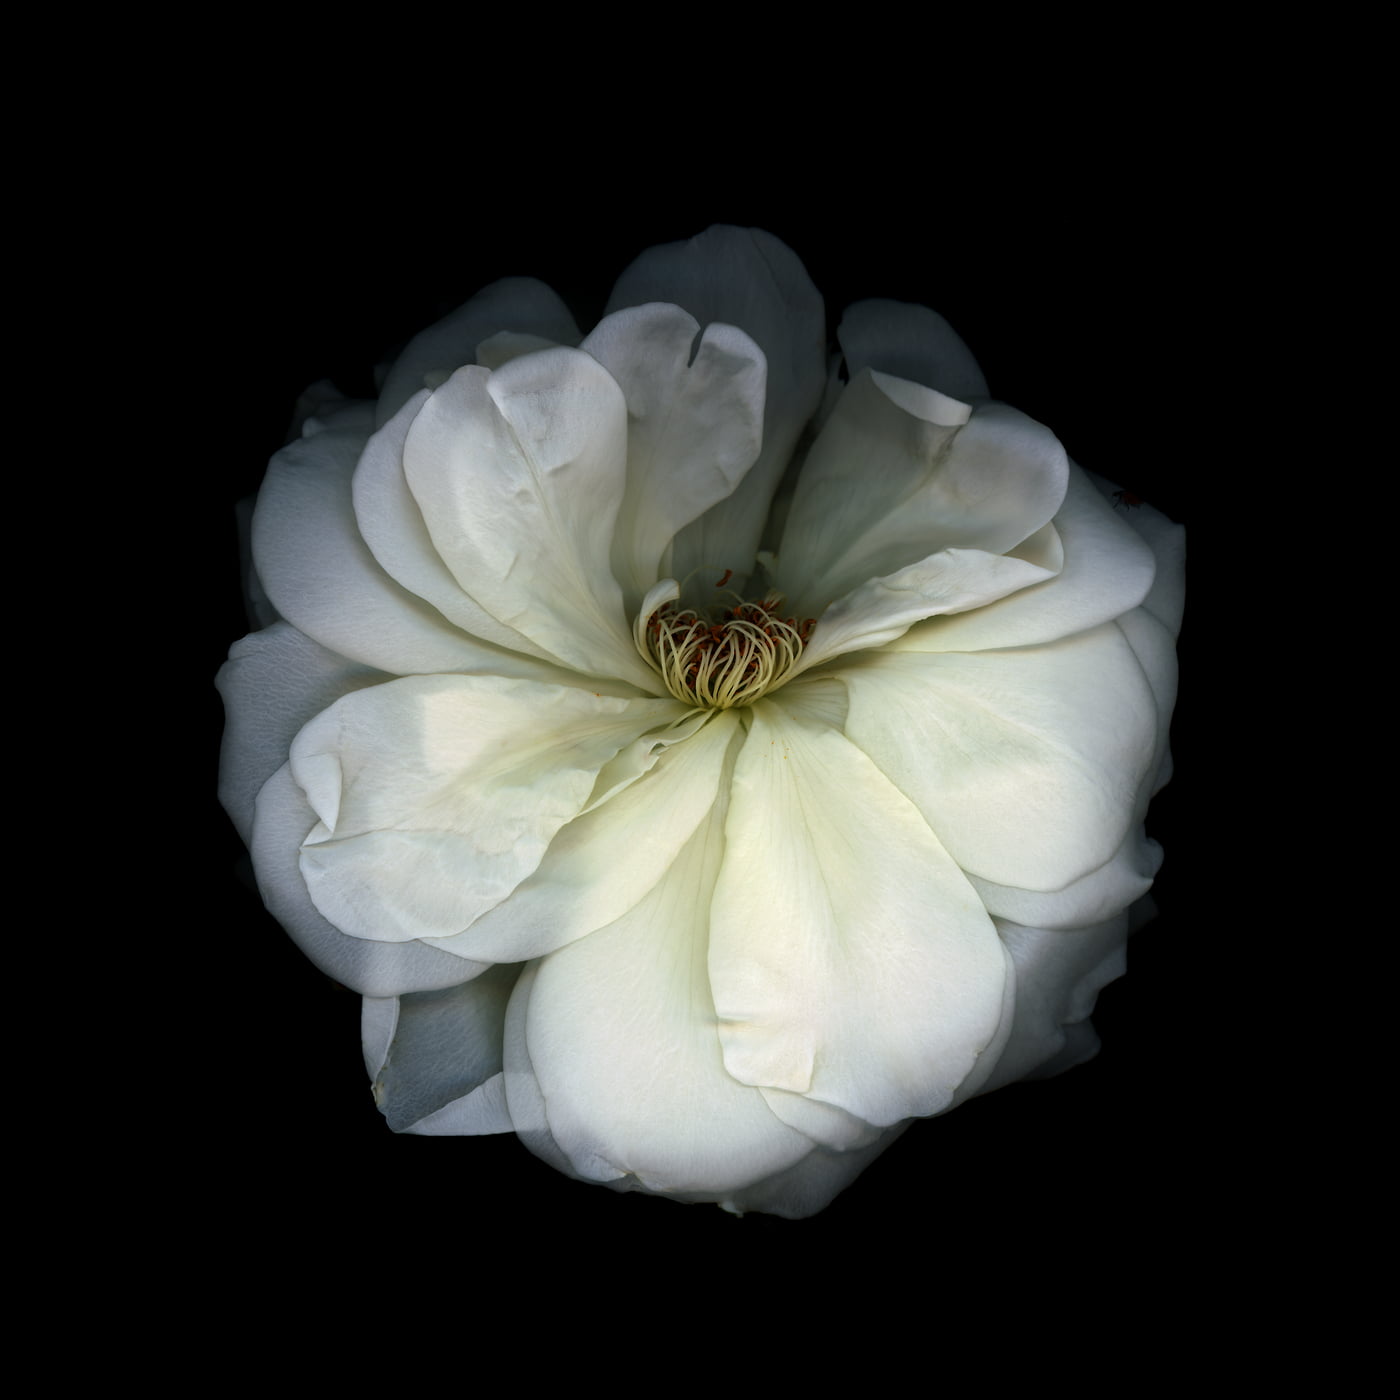 201 megapixels! A very high resolution, large-format macro photo print of a flower; nature photograph created by Anja Axelsson.